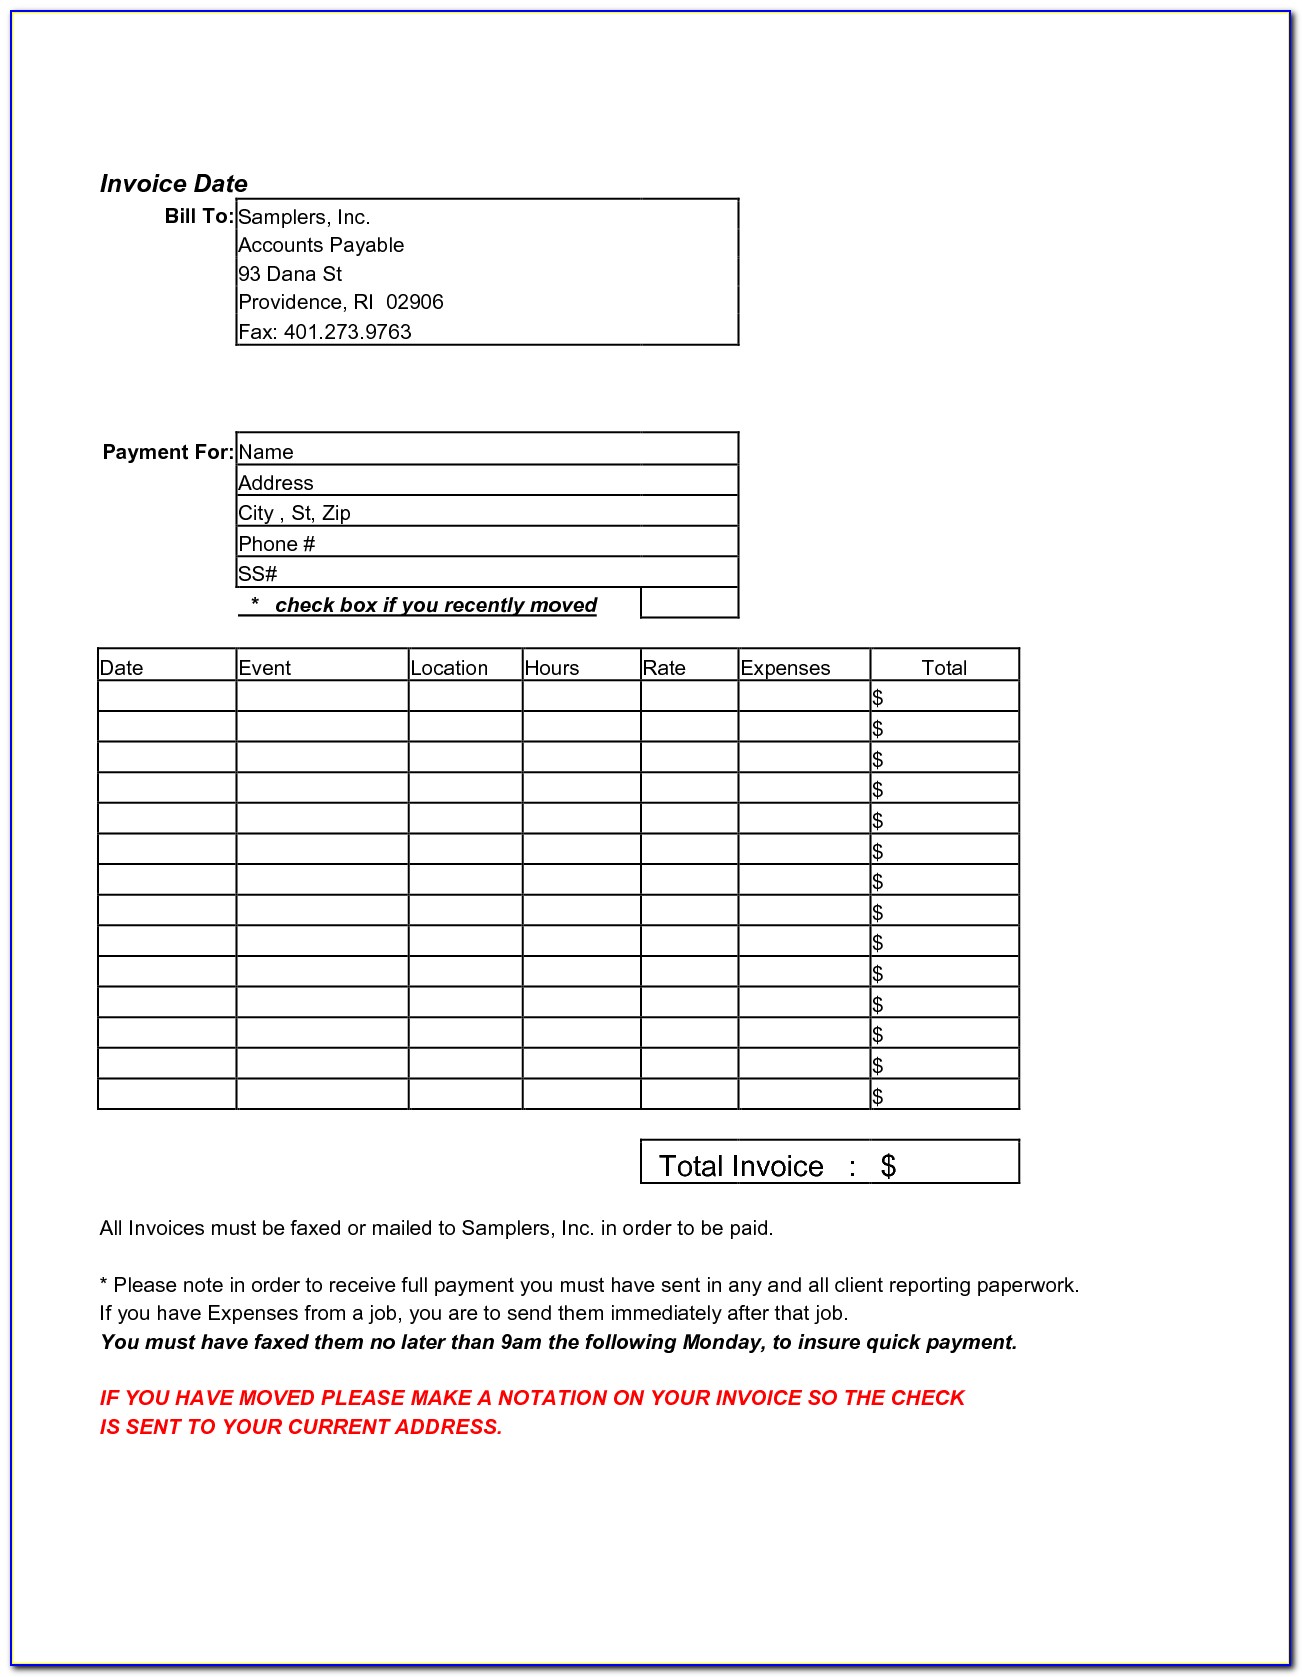 Independent Contractor Invoice Template Word